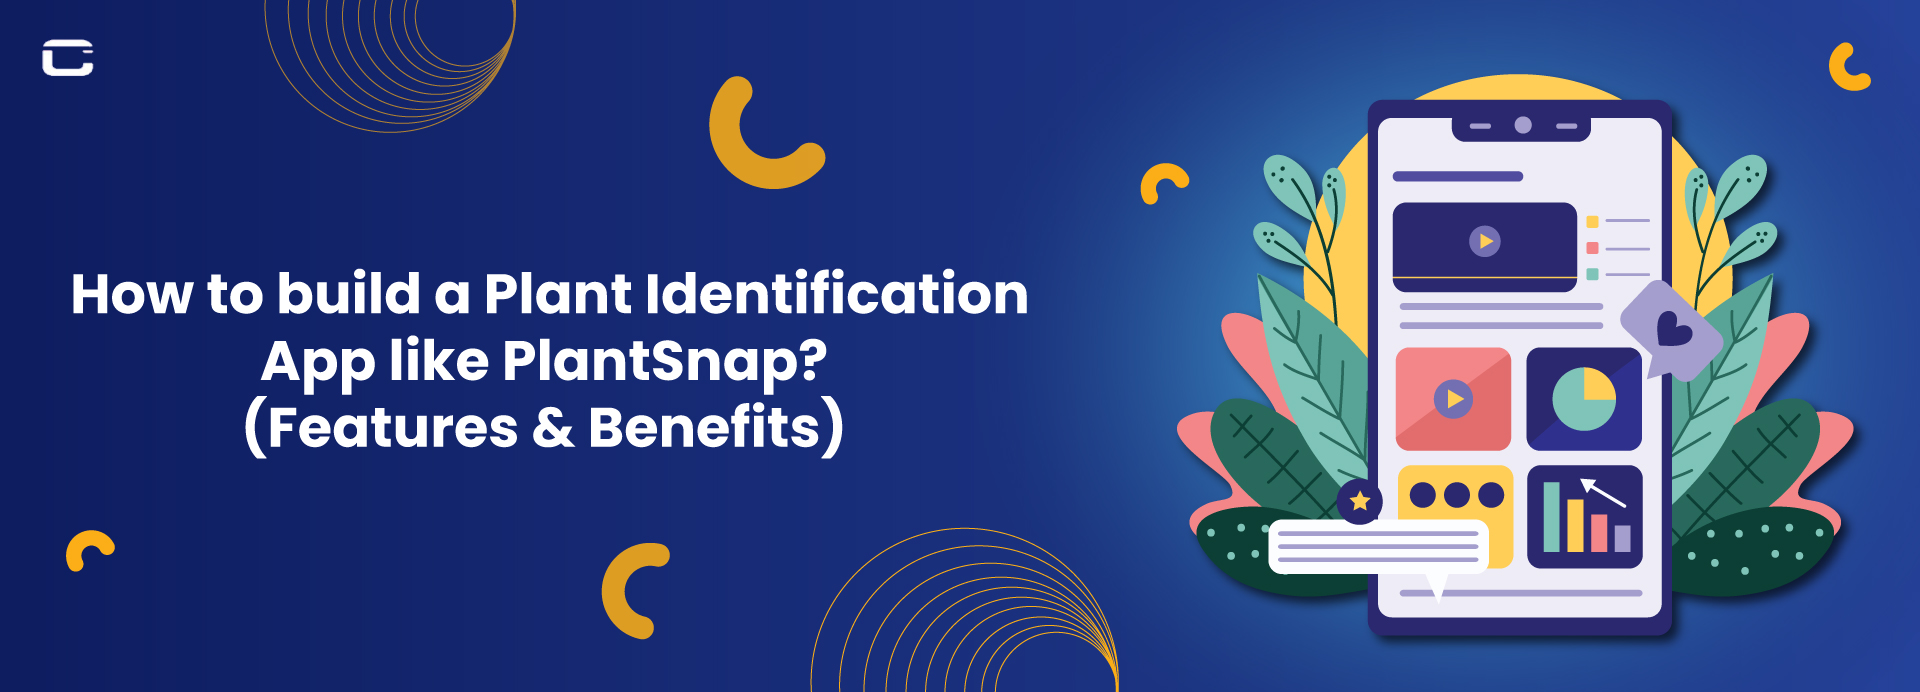 How to build a Plant Identification App like PlantSnap? (Features & Benefits)